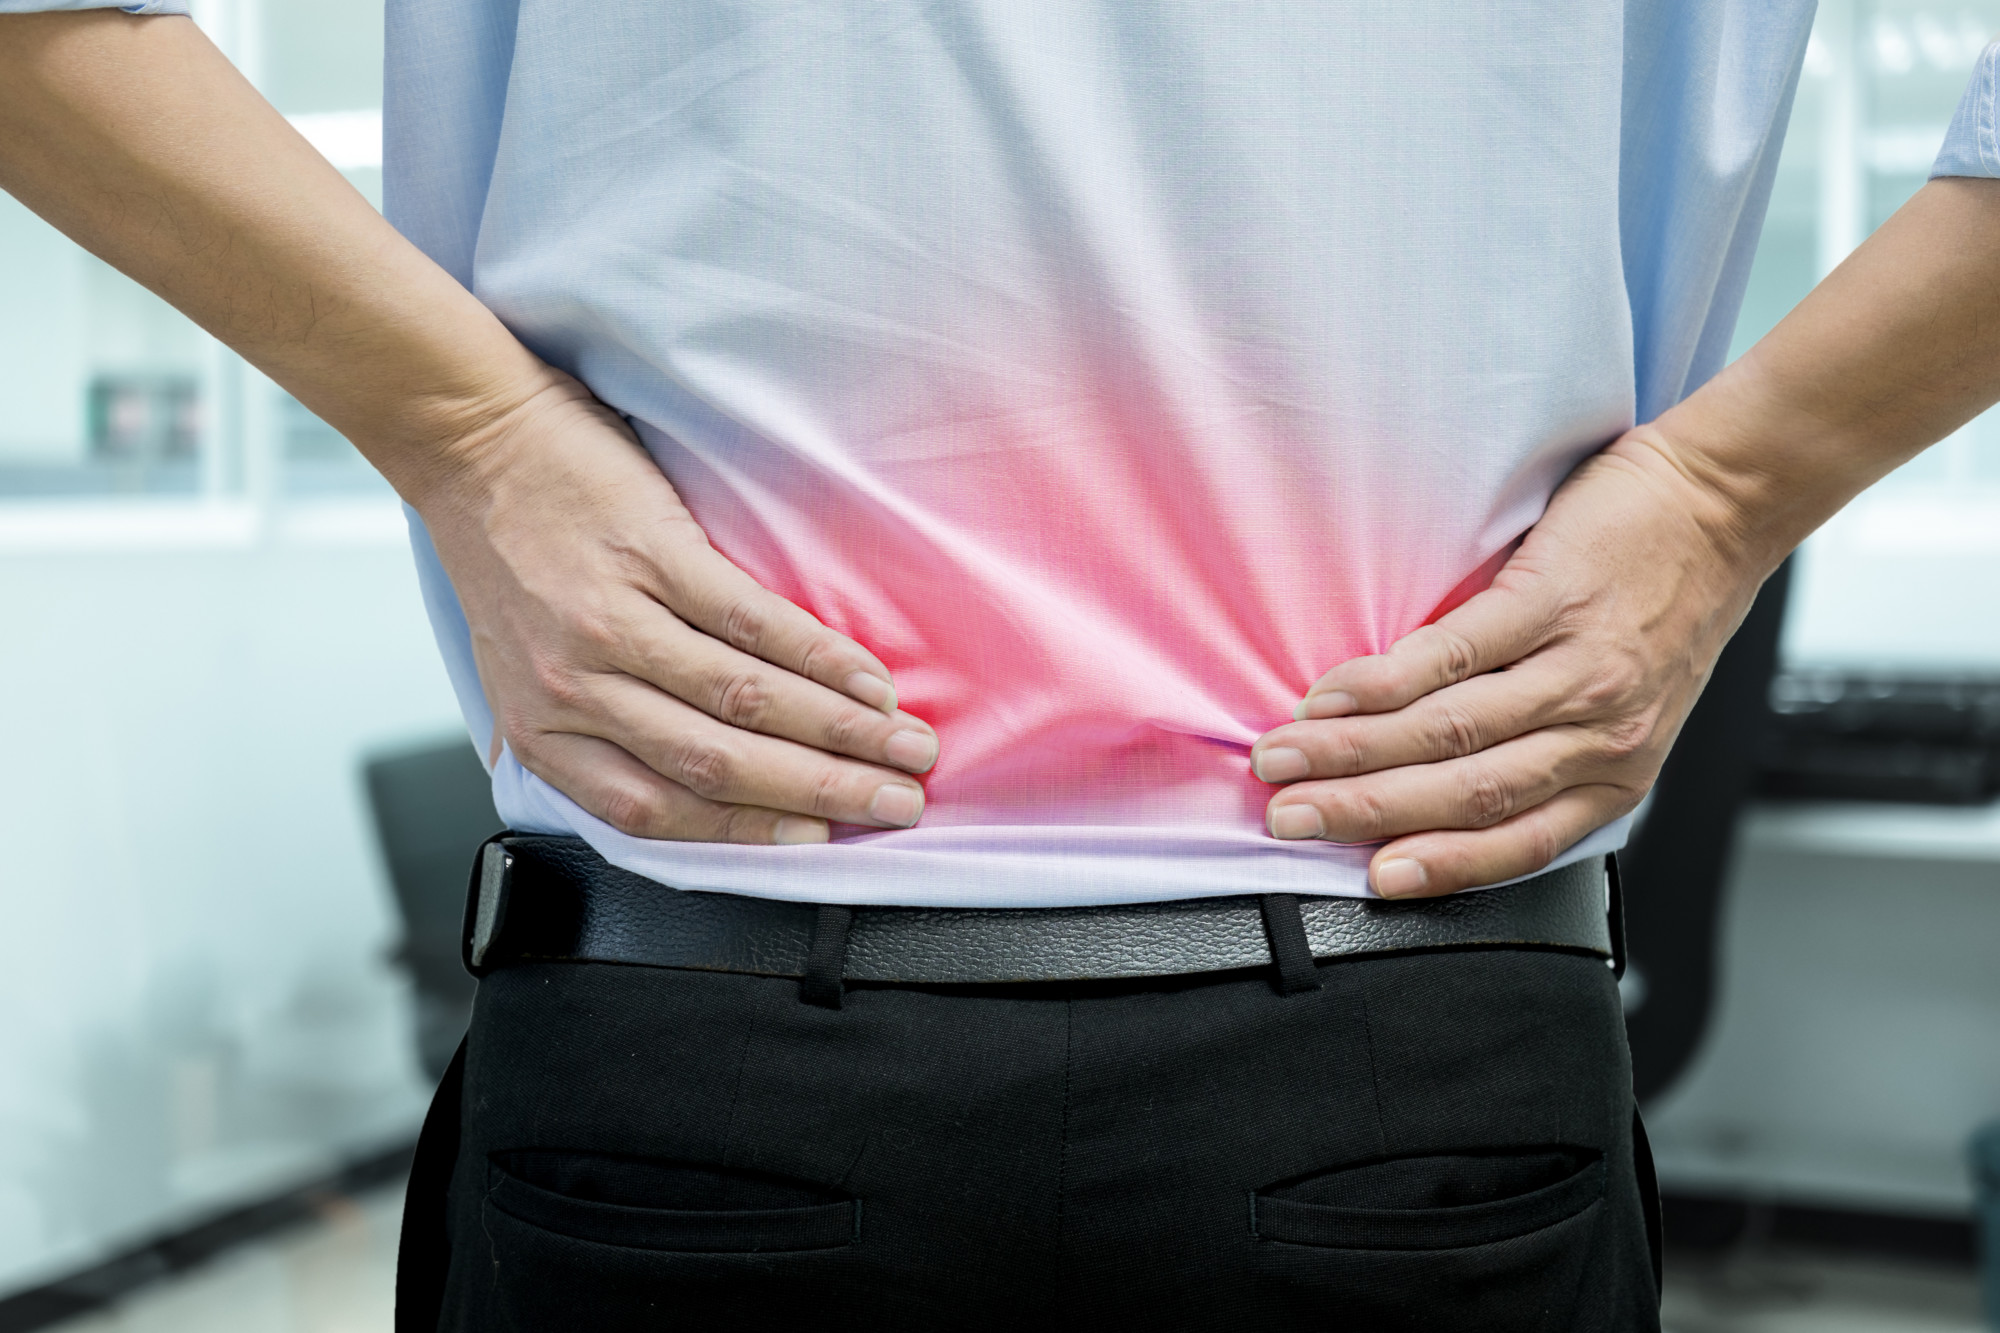 UK Data Reveals Back Breaking Pain Sufferers Are Struggling To Get Relief